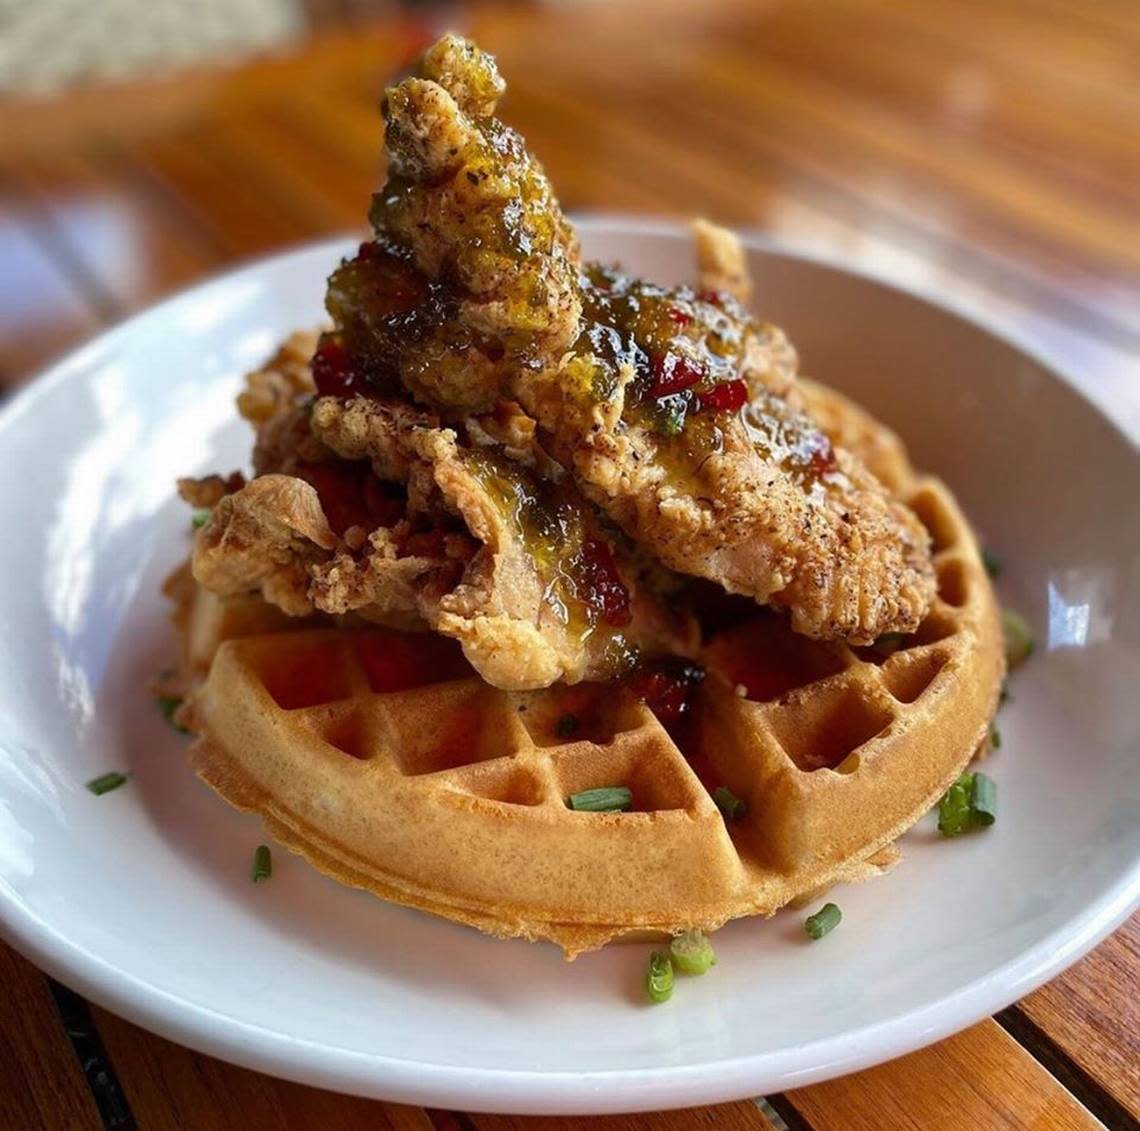 Chicken and waffles was a signature dish on Saul Good’s menu since it opened in 2008.